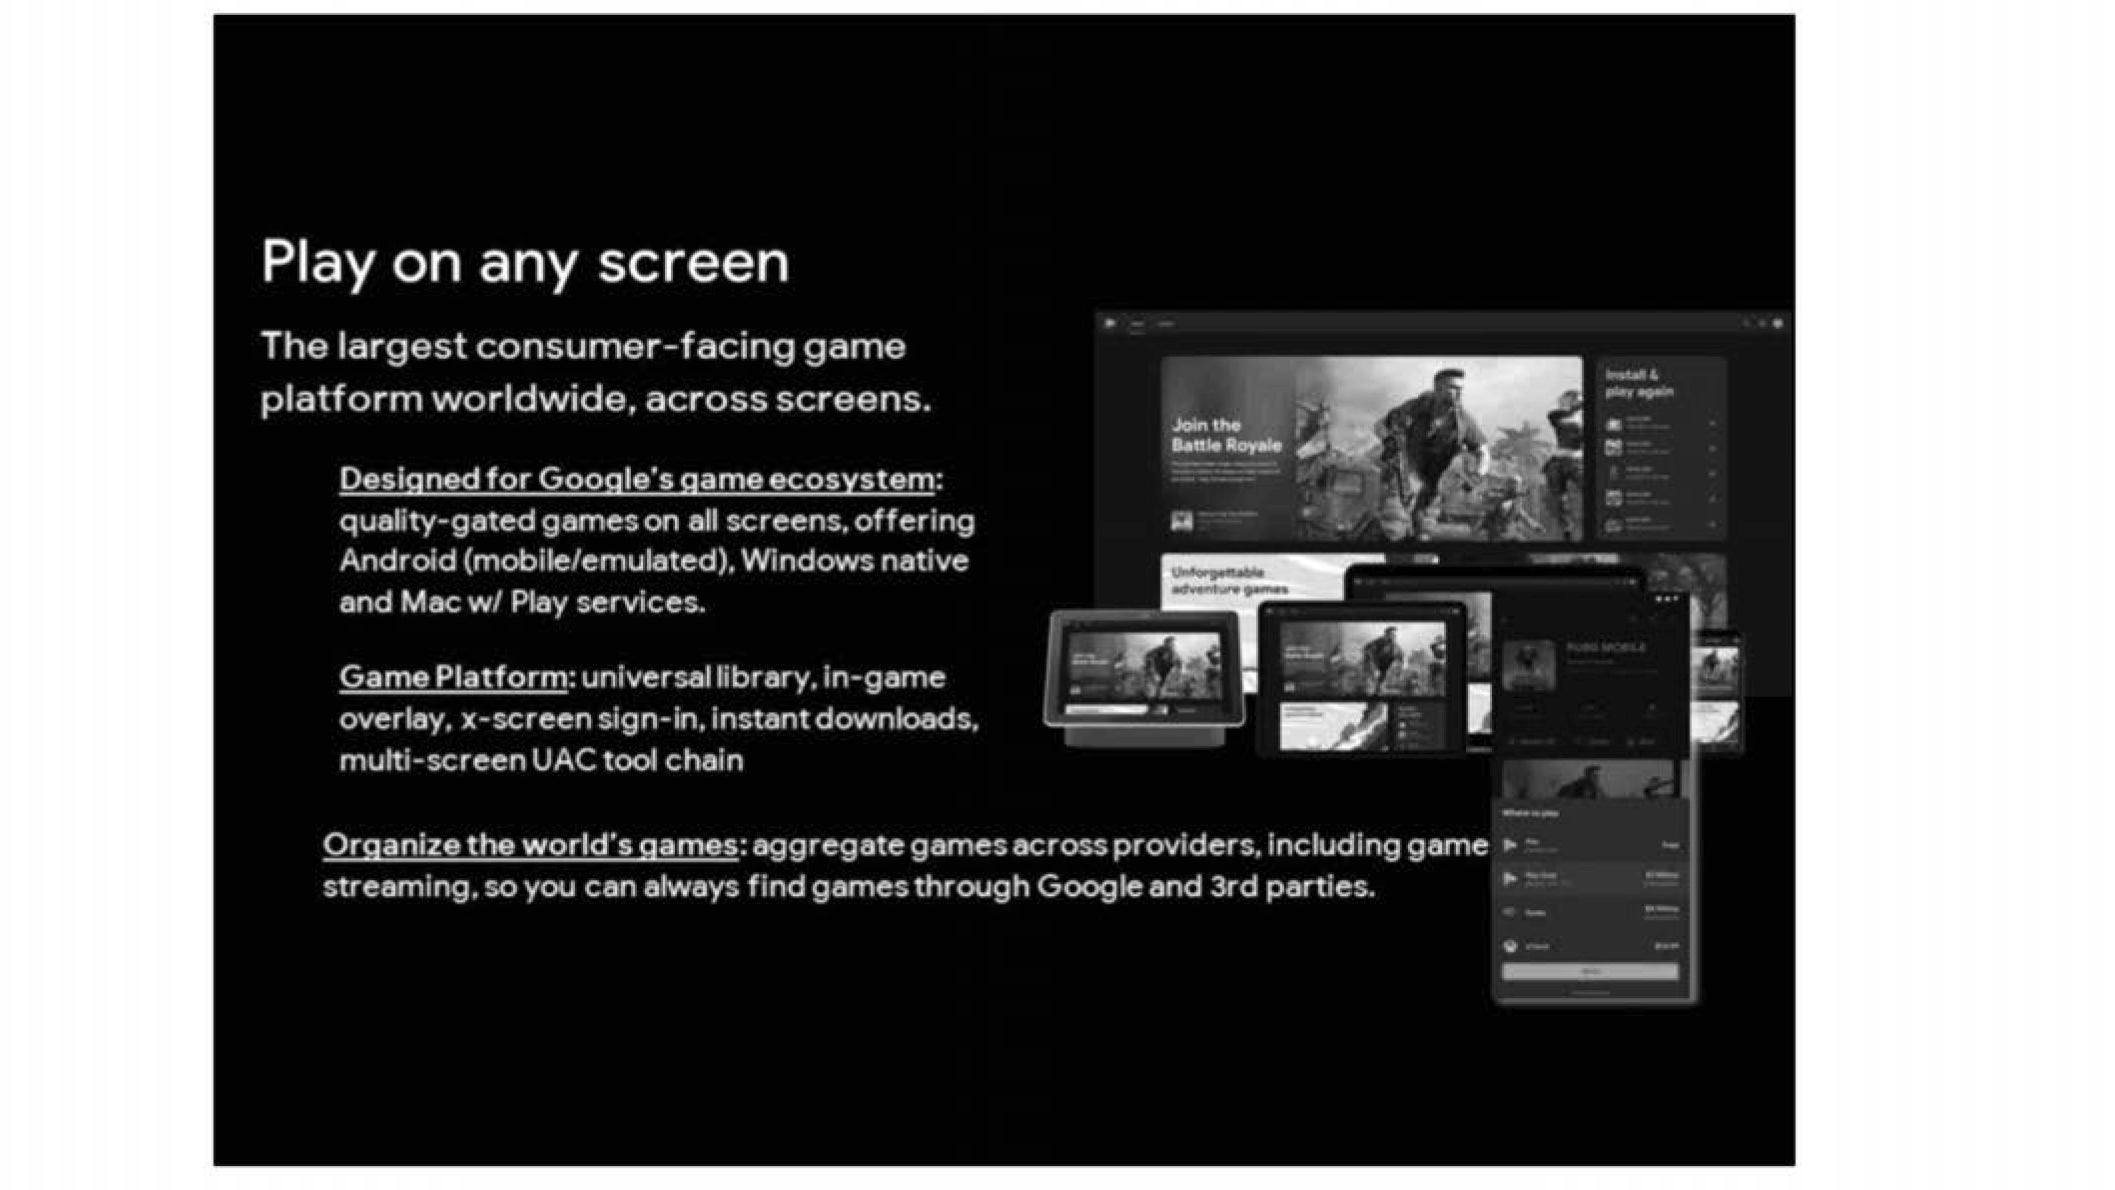 Court Docs Show Google’s Gaming Plans Include Native Android Apps on Windows and Mac